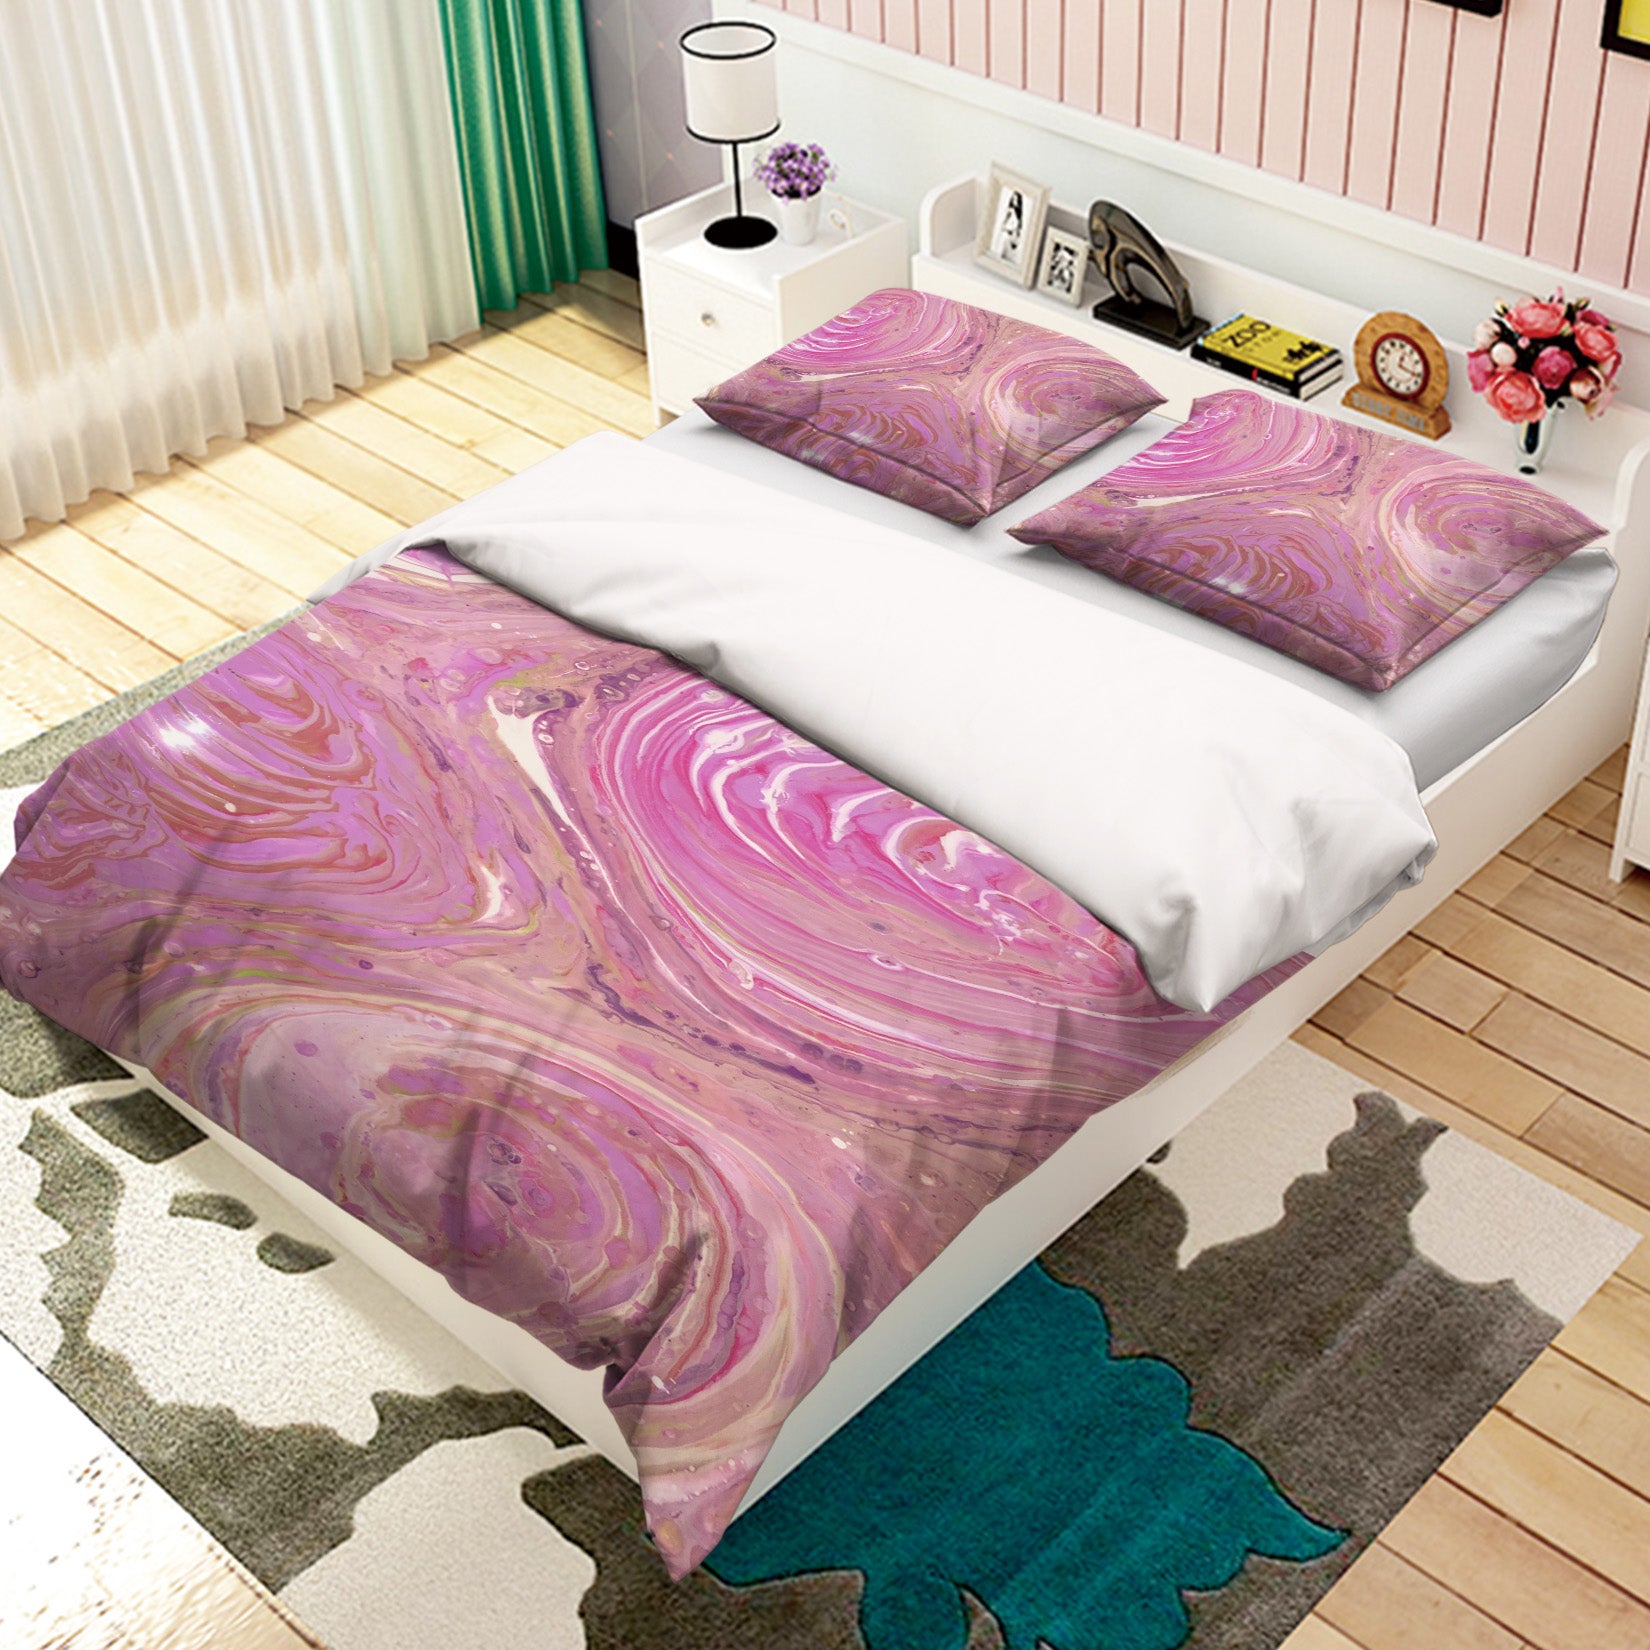 3D Pink Pattern 40055 Valerie Latrice Bedding Bed Pillowcases Quilt